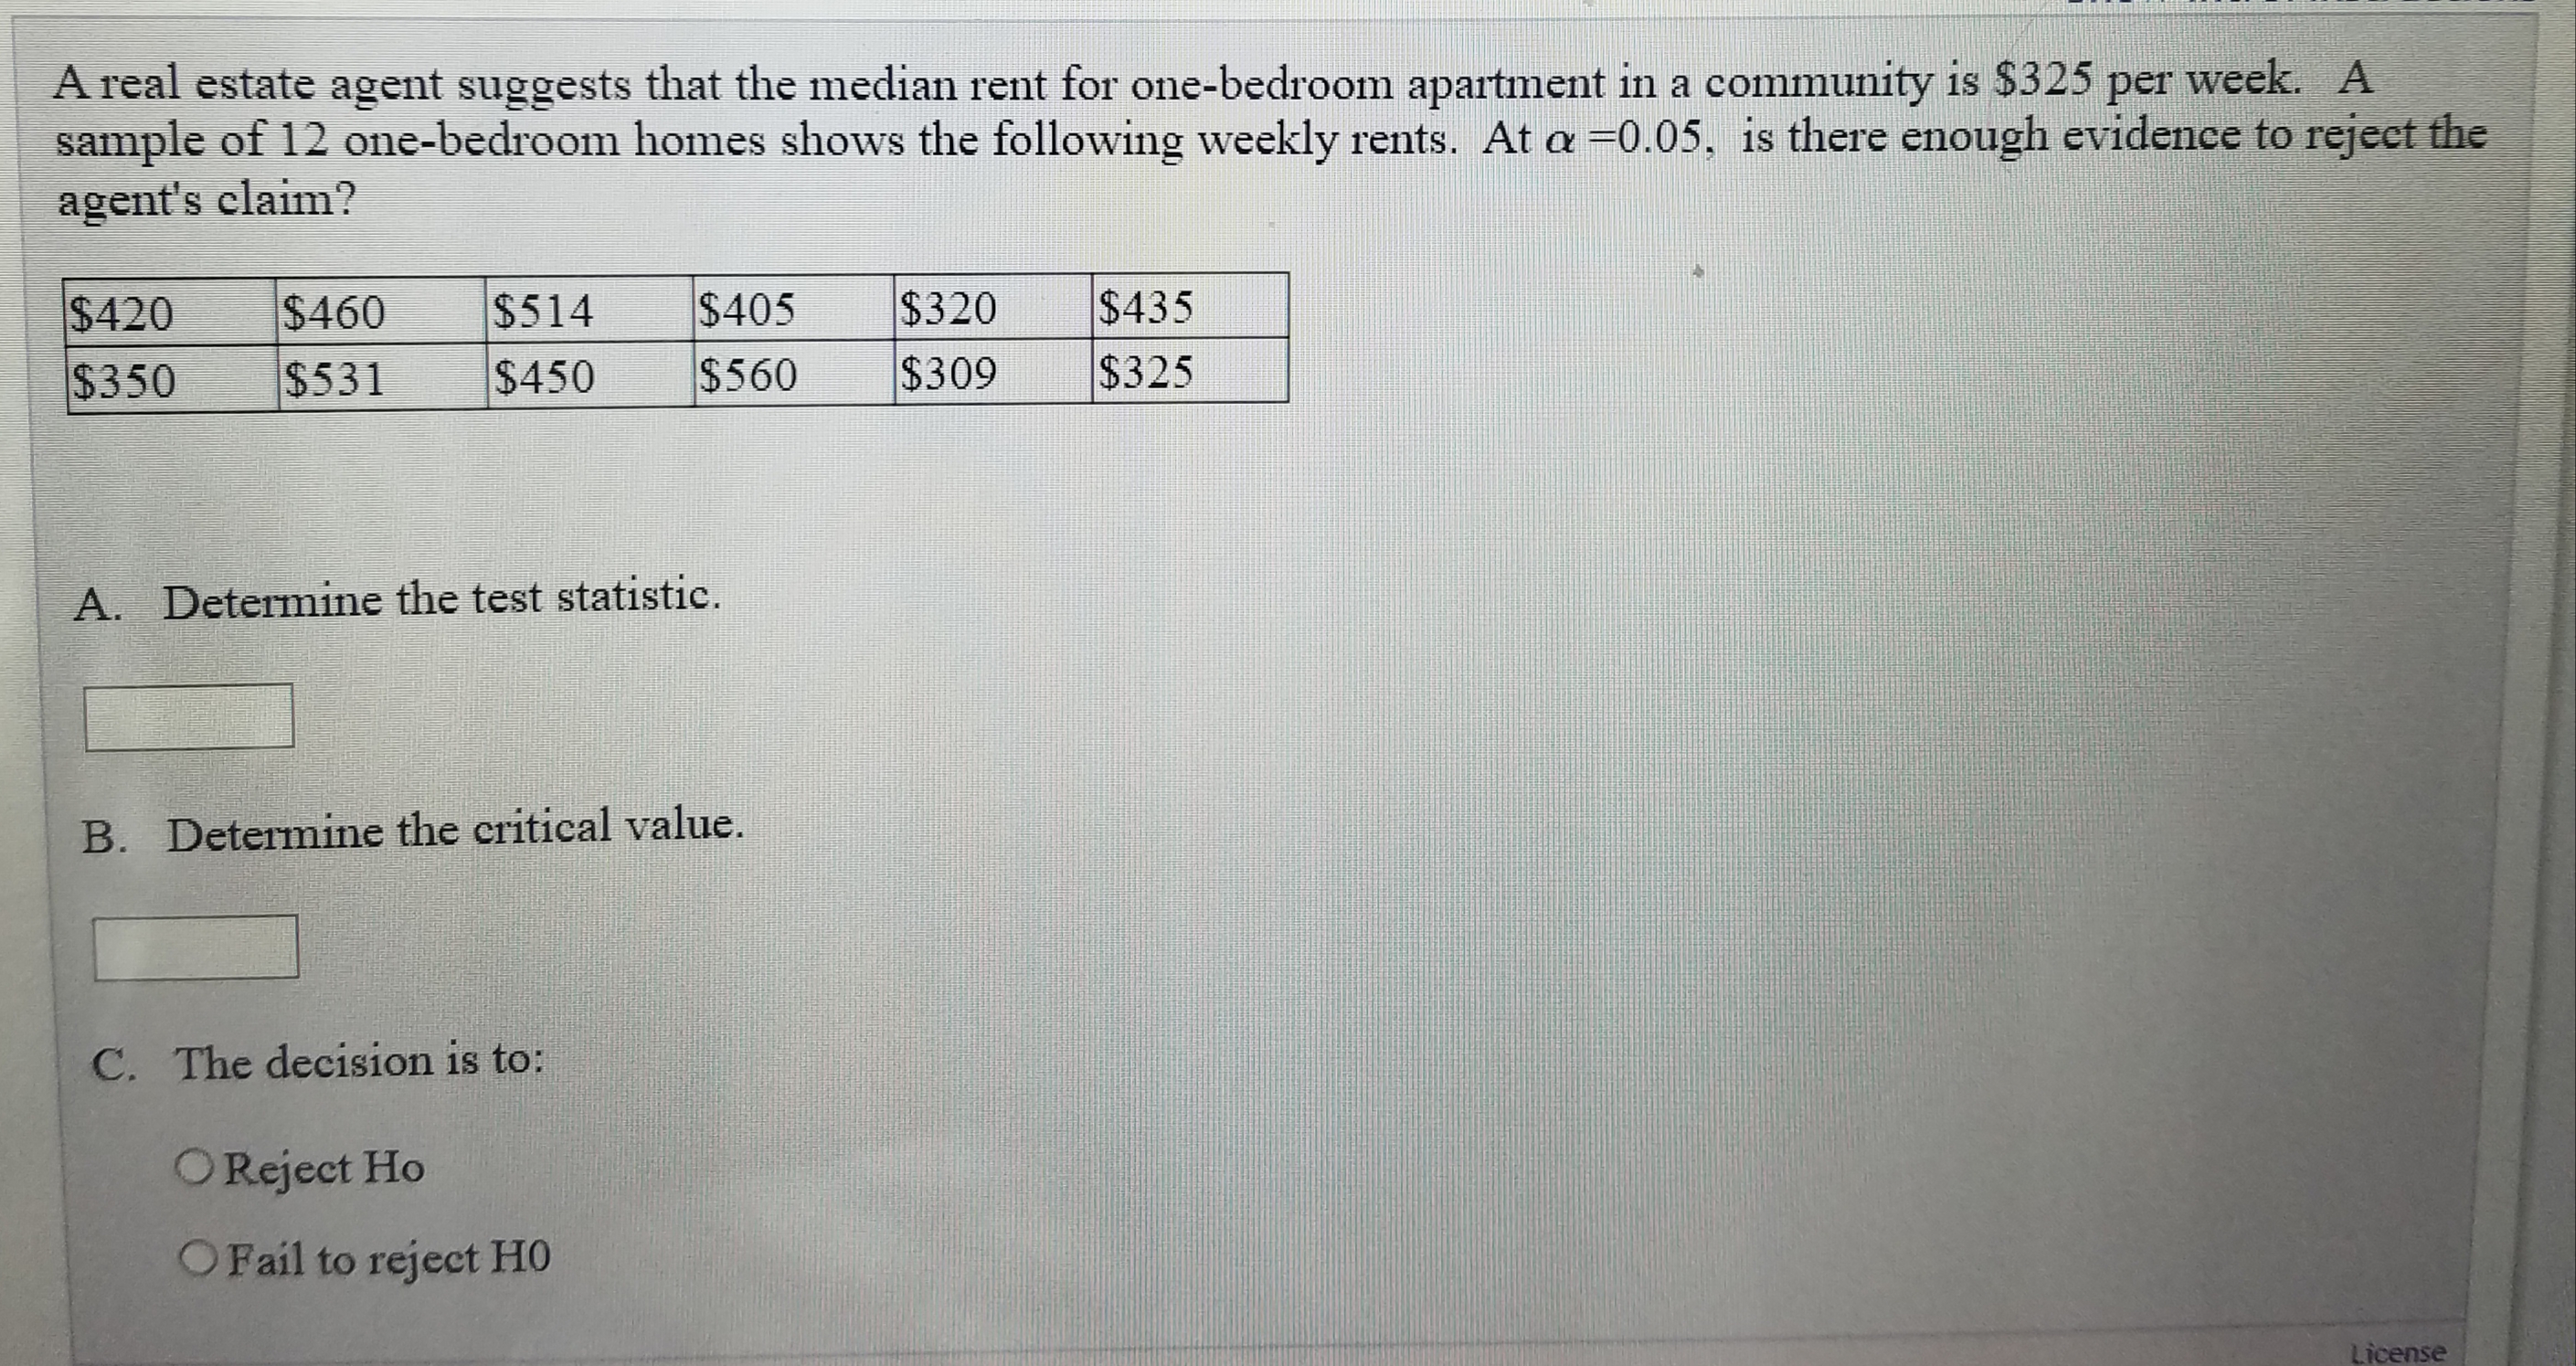 A real estate agent suggests that the median rent for one-bedroom apartment in a community is $325 per week. A
sample of 12 one-bedroom homes shows the following weekly rents. At a =0.05, is there enough evidence to reject the
agent's claim?
$405
$560
$320
$309
$435
$325
$420
$460
$514
$350
$531
$450
A. Determine the test statistic.
B. Determine the critical value.
C. The decision is to:
OReject Ho
OFail to reject HO
License
